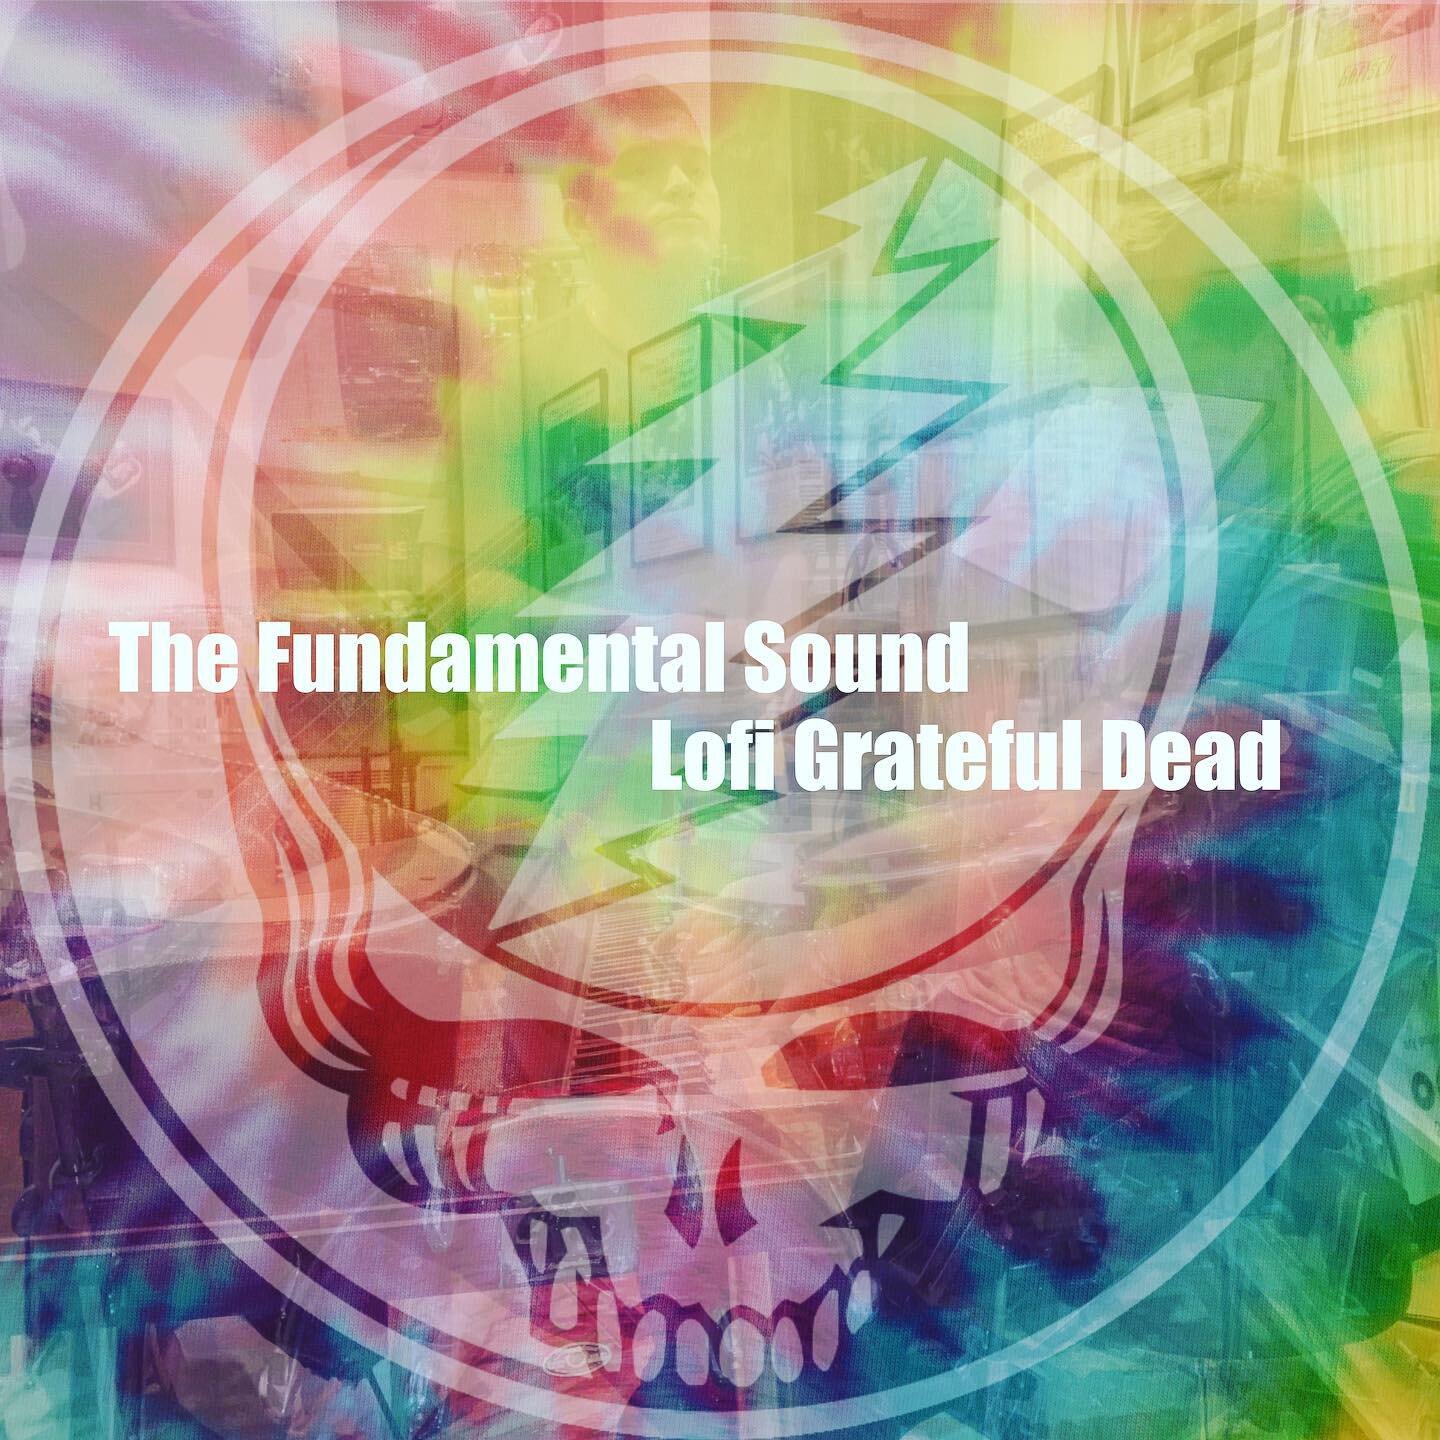 Lofi Grateful Dead is out today!
.
&lsquo;Like if Ramsey Lewis teamed up with James Jamerson and James Gadsen to remake some Dead tunes&rsquo;
.
All sounds make by Dan Klug
Mixed by @jimstewartrec 
Mastered by @doctormillice 
Room Sound Records, 2022